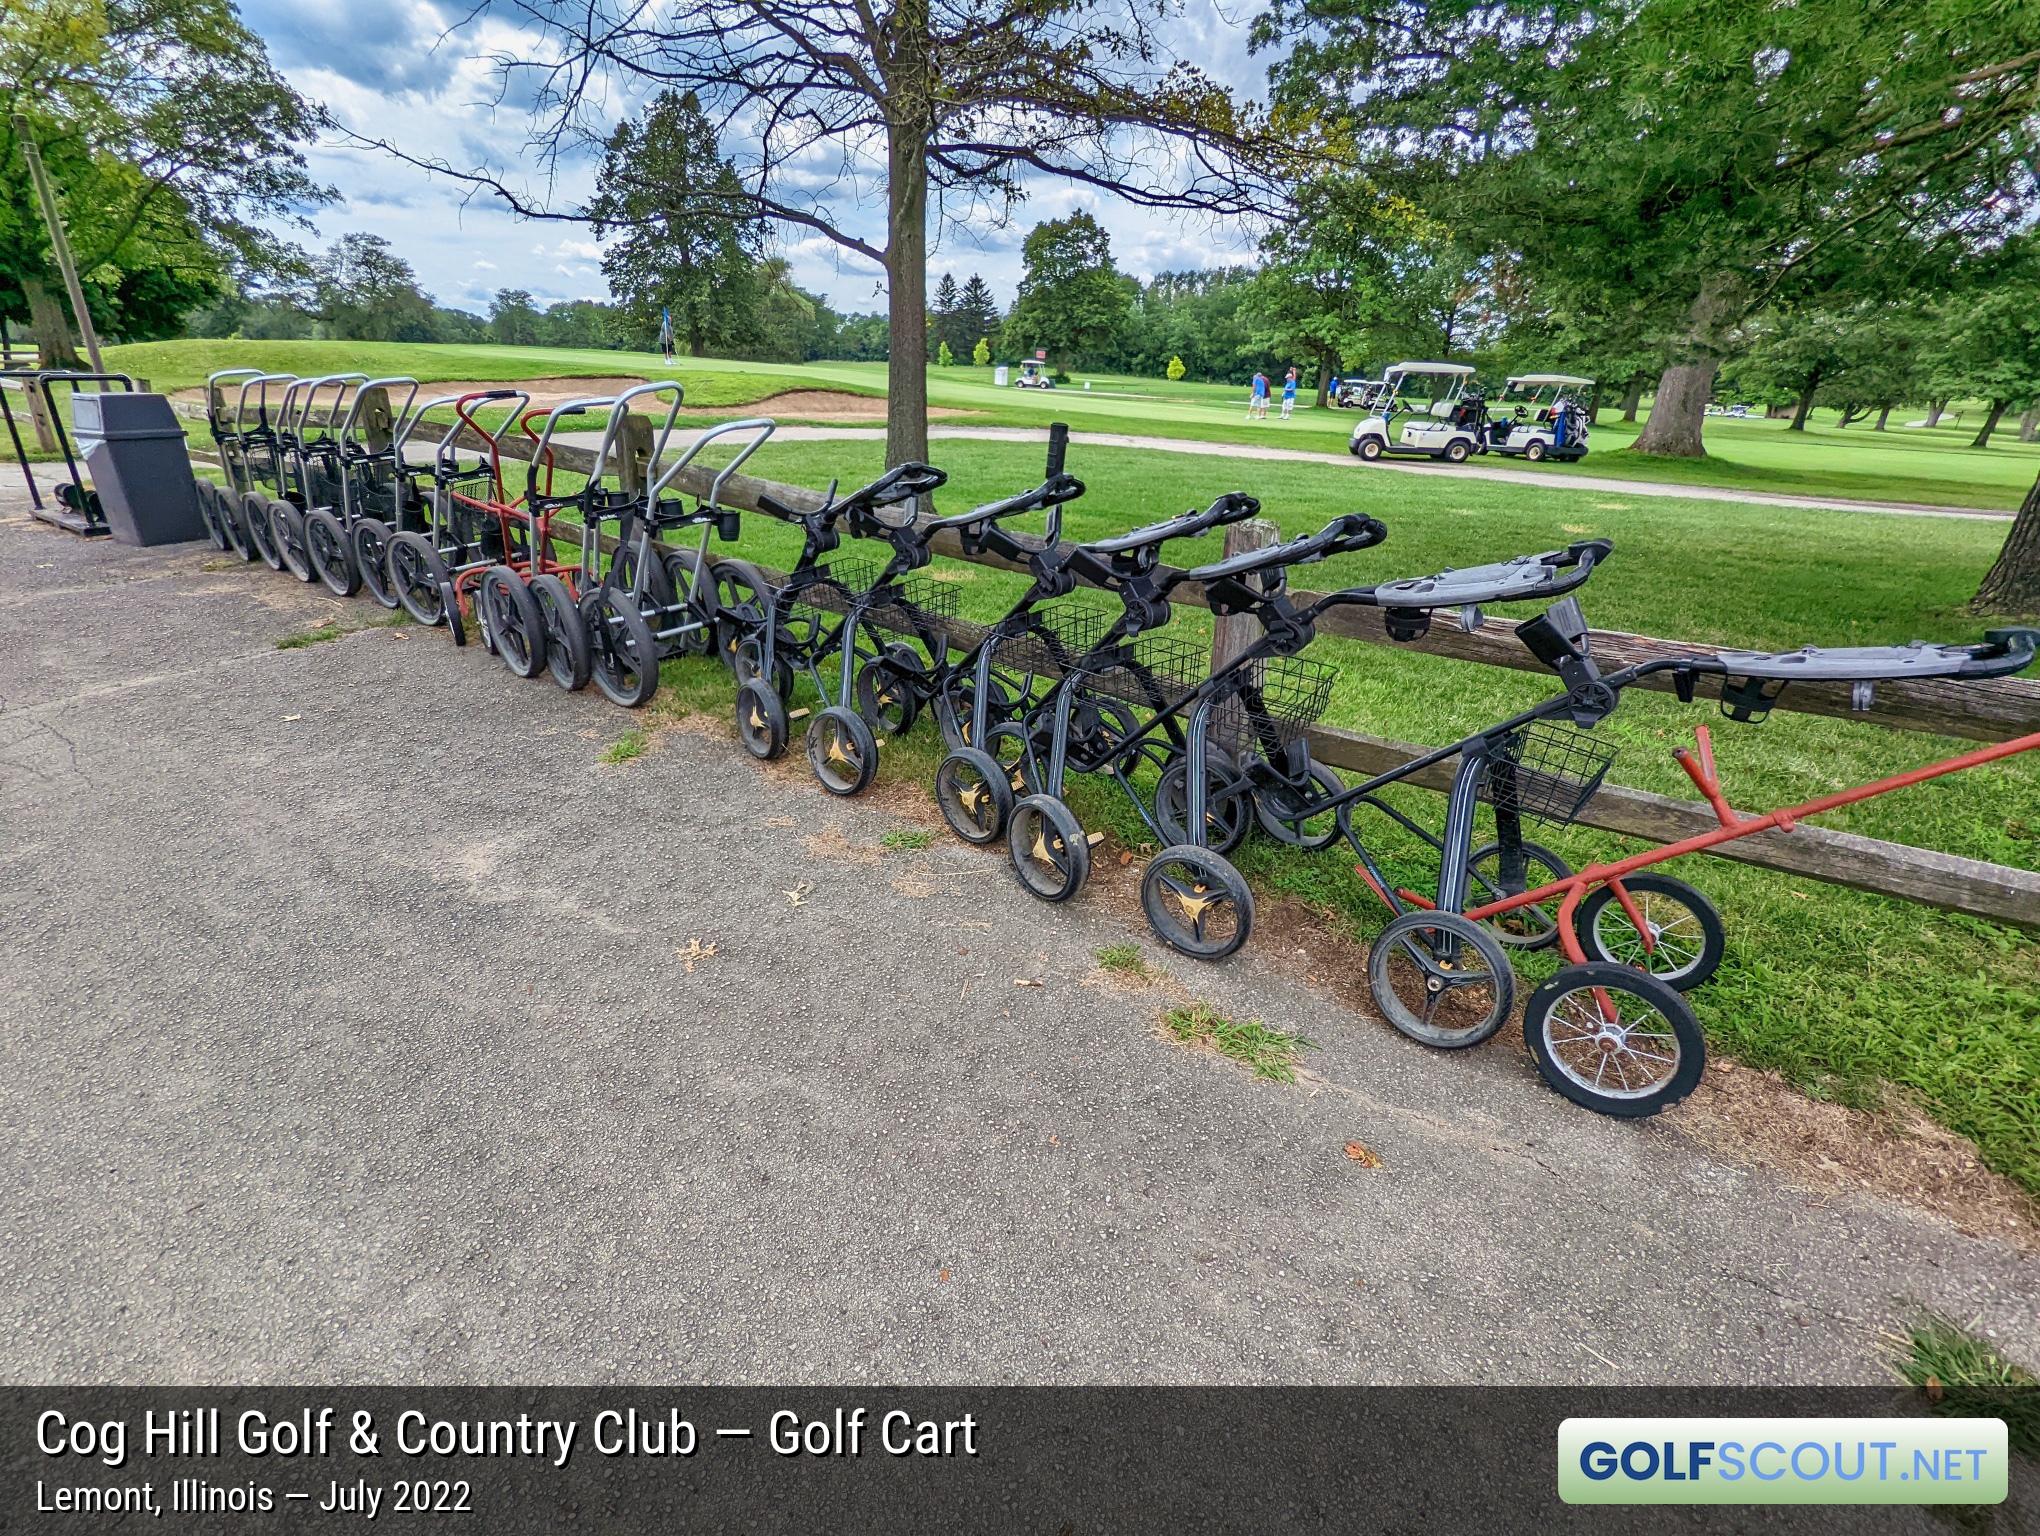 Photo of the golf carts at Cog Hill Course #1 in Lemont, Illinois. Lots of different varieties.